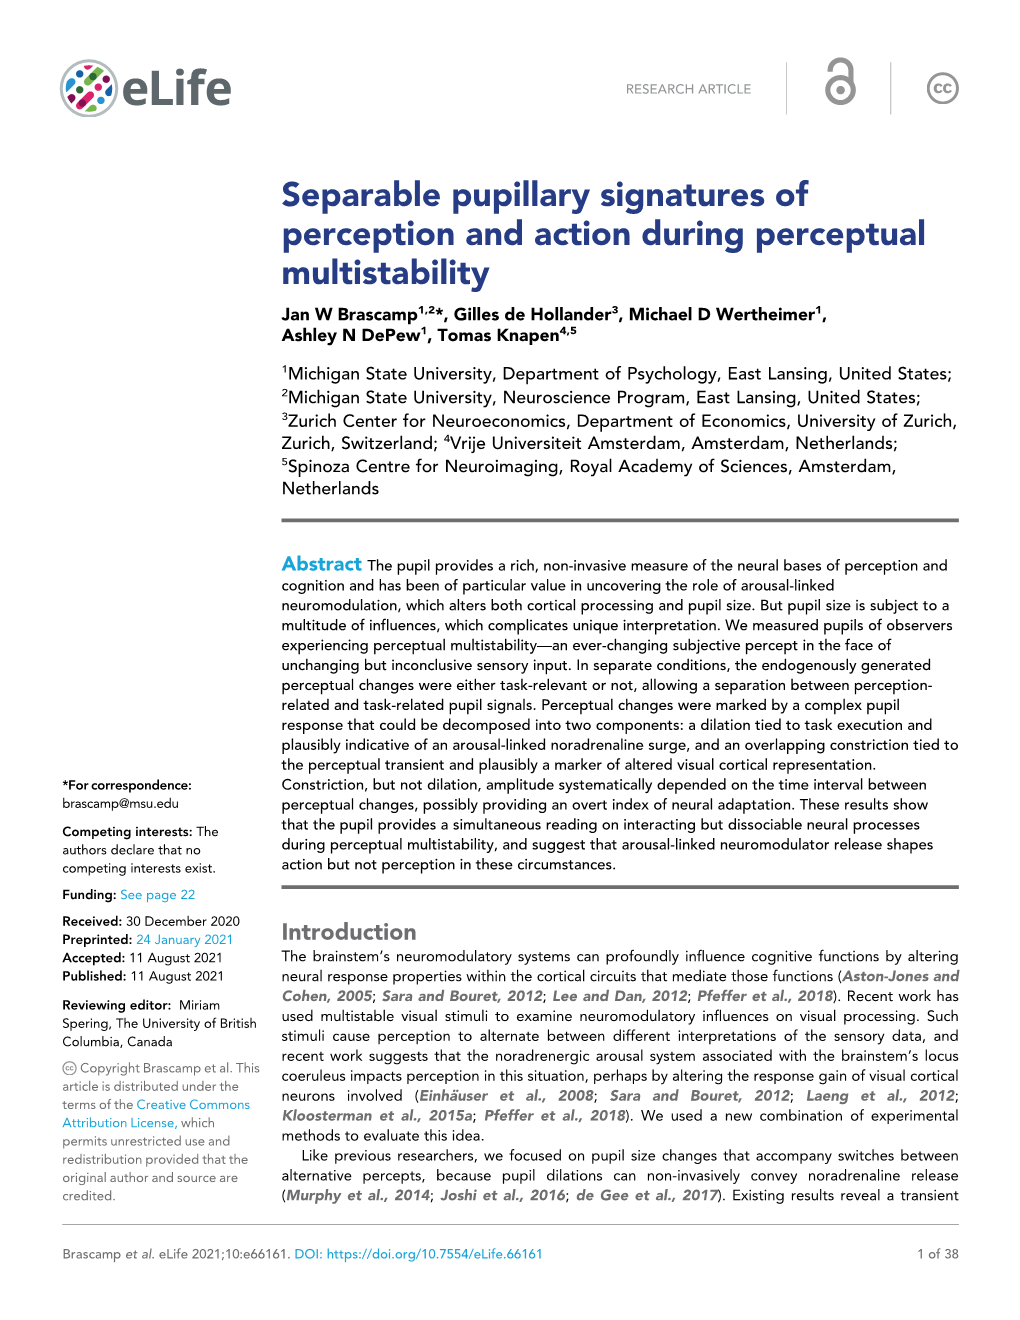 Separable Pupillary Signatures of Perception and Action During